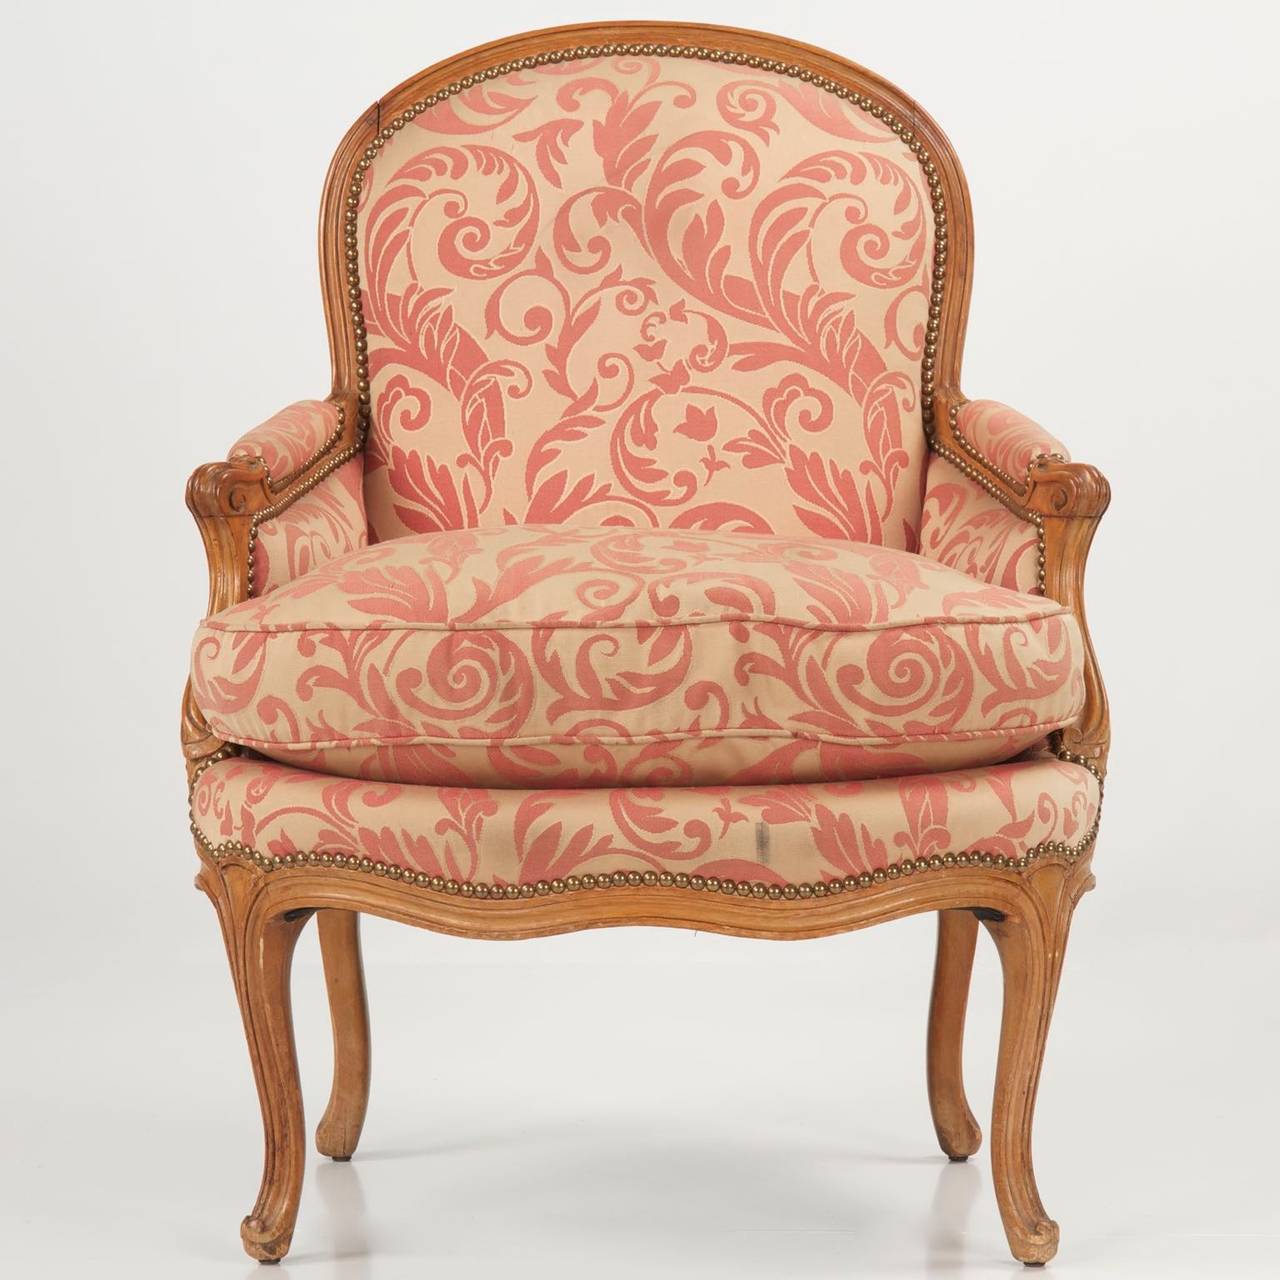 This finely carved Louis XV Beechwood bergere features clean and curvy lines.  Constructed probably during the late 18th Century, possibly the early years of the 19th Century, the chair exhibits excellent craftsmanship throughout - unusually heavy